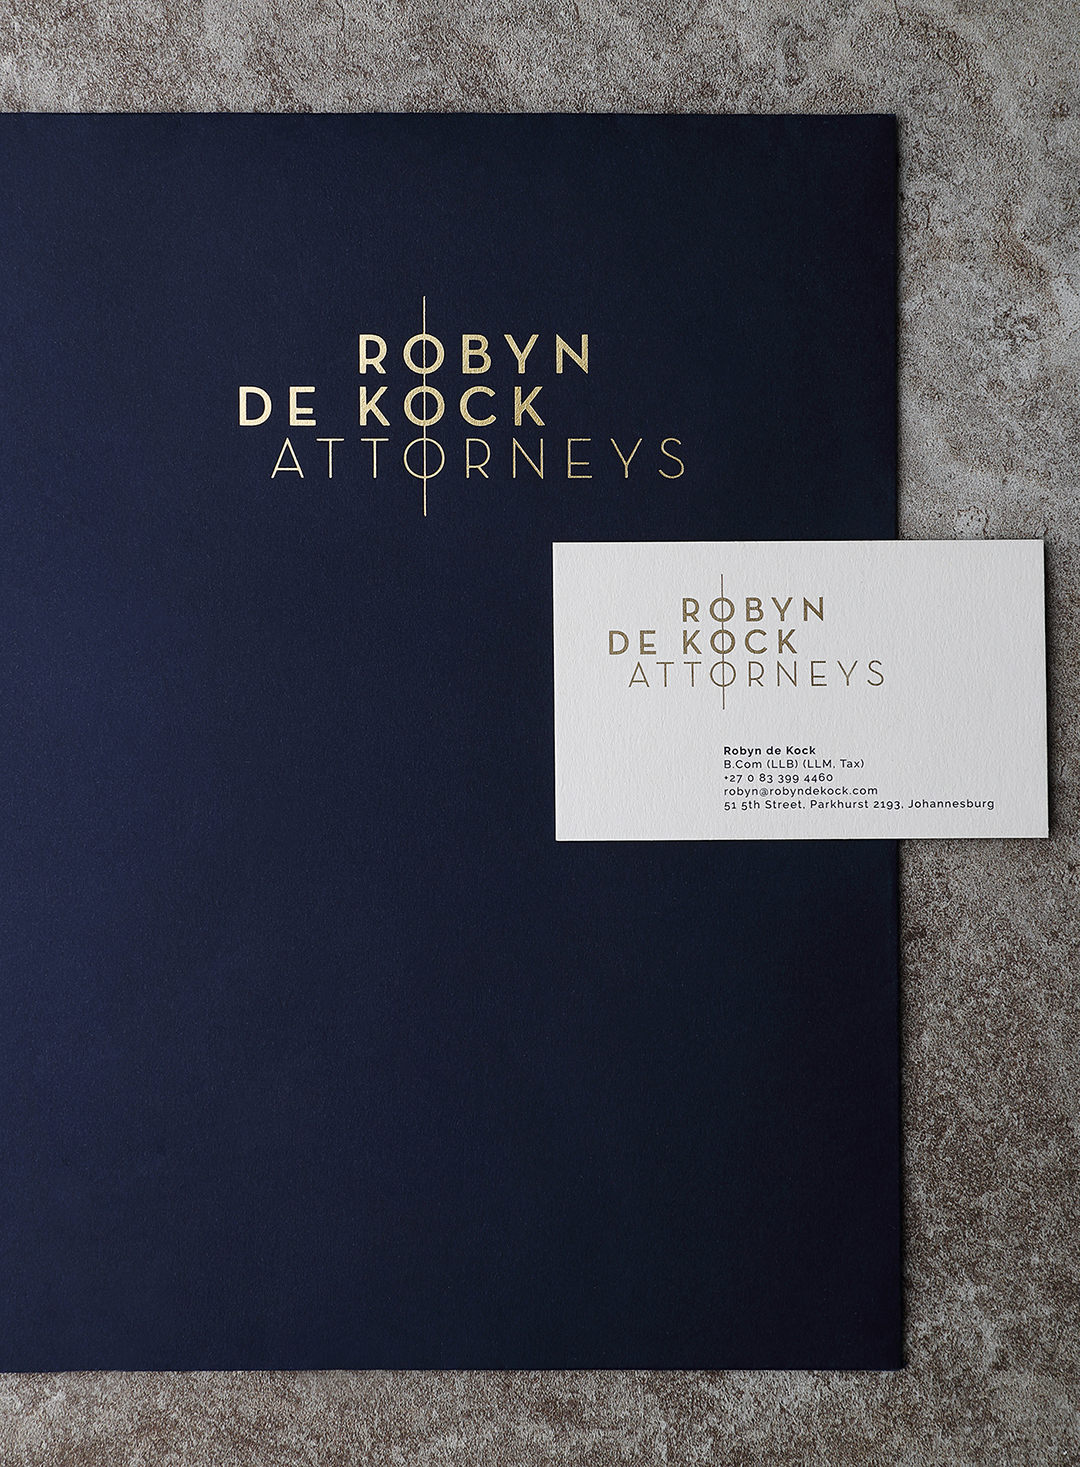 Robyn De Kock Attorneys business card and envelope design. By MR.SMiTH